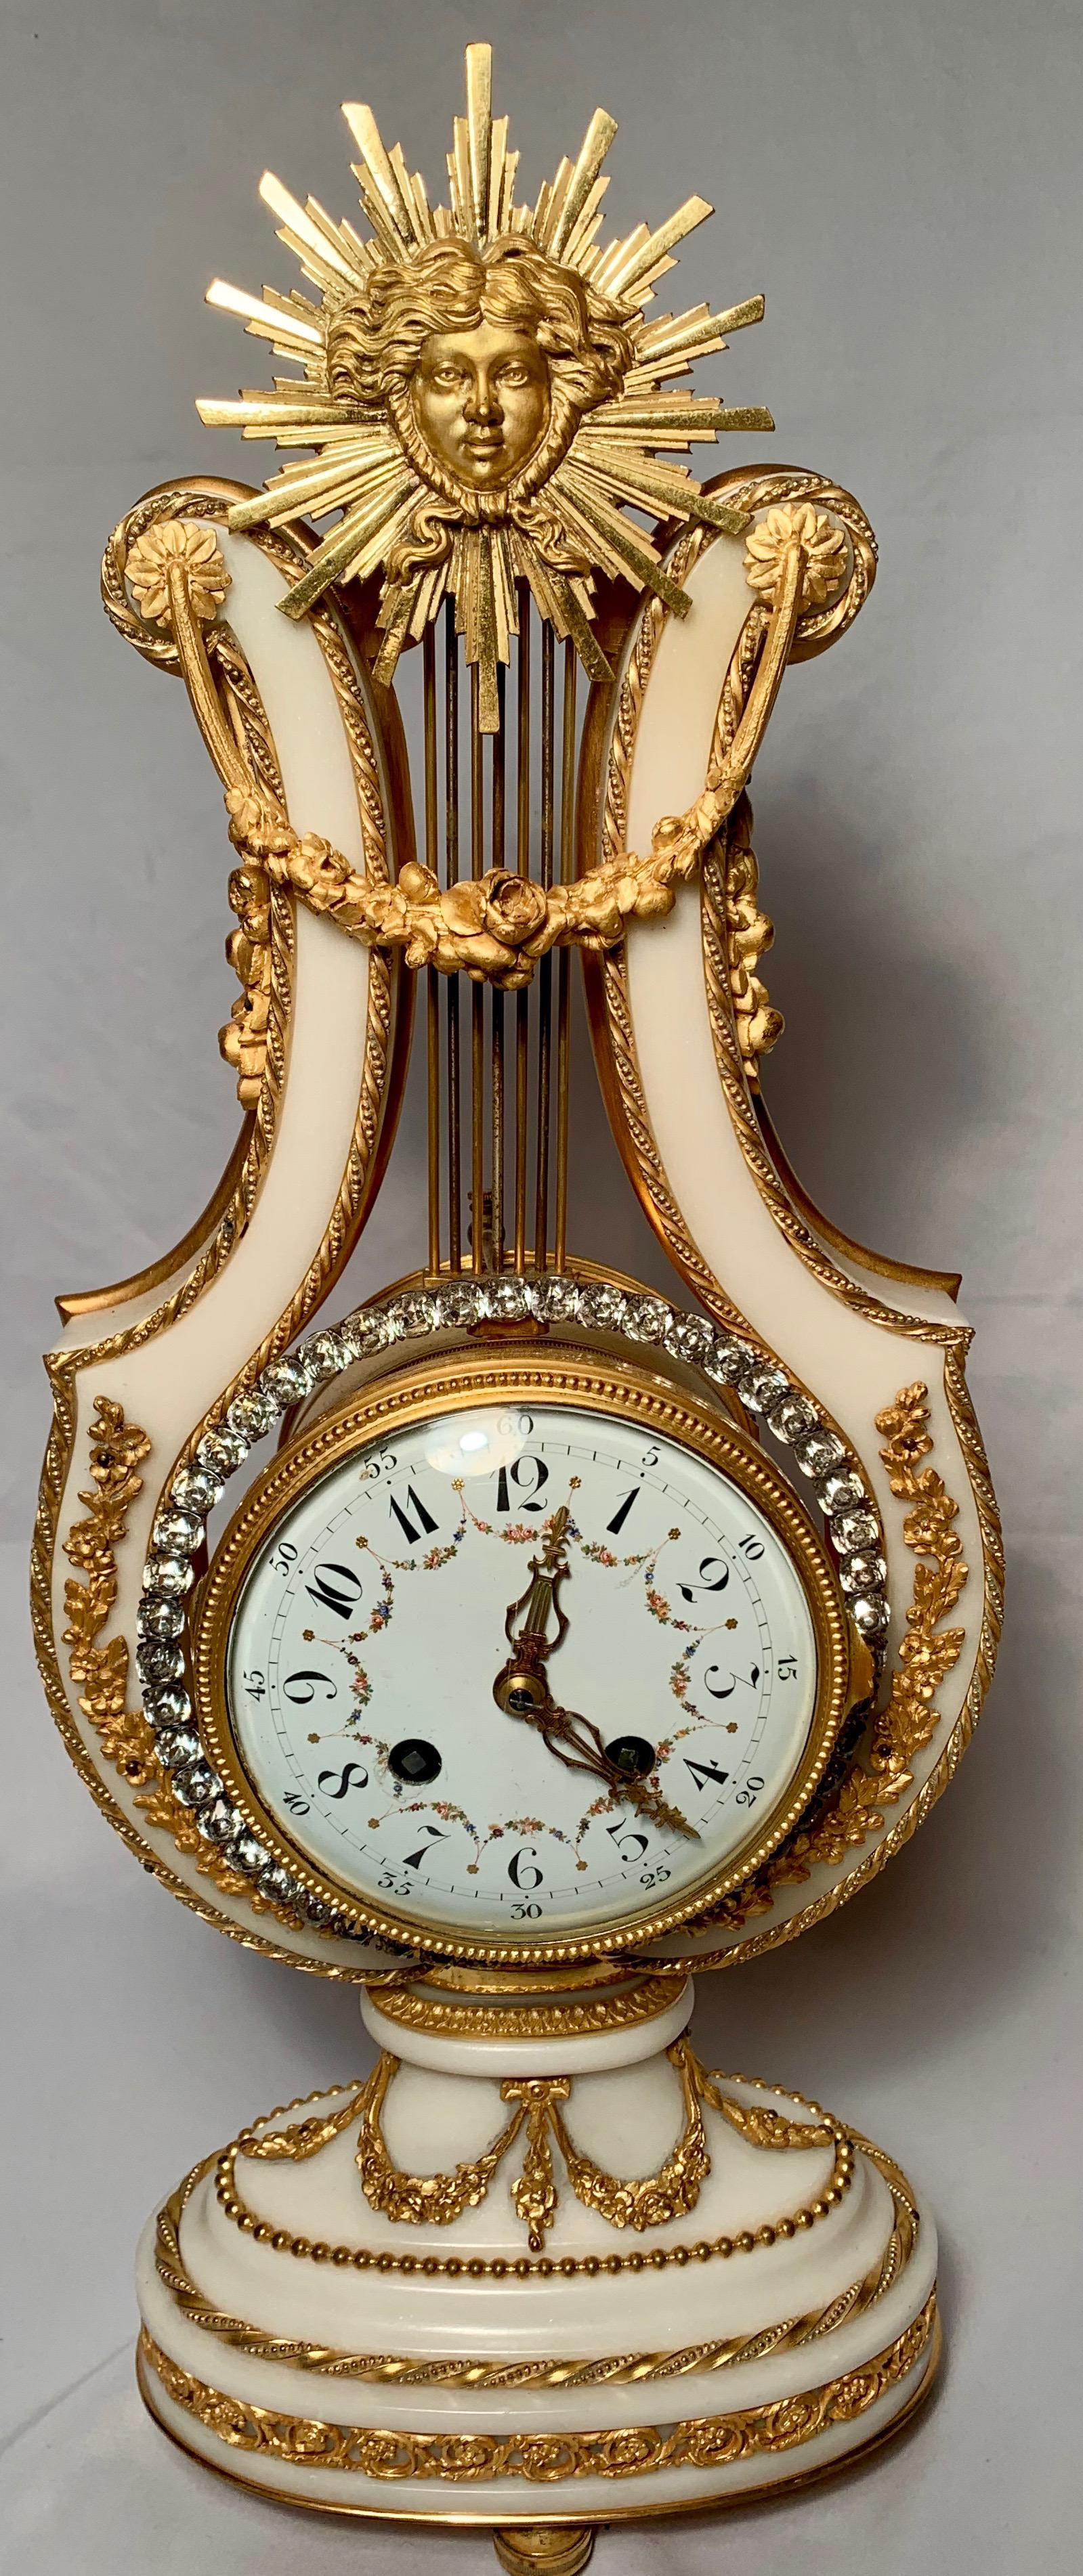 This is a beautiful clock set with exquisite execution. The Carrara marble makes it all the more special! We have listed this as one item - and it is indeed one item, composed of three parts.


